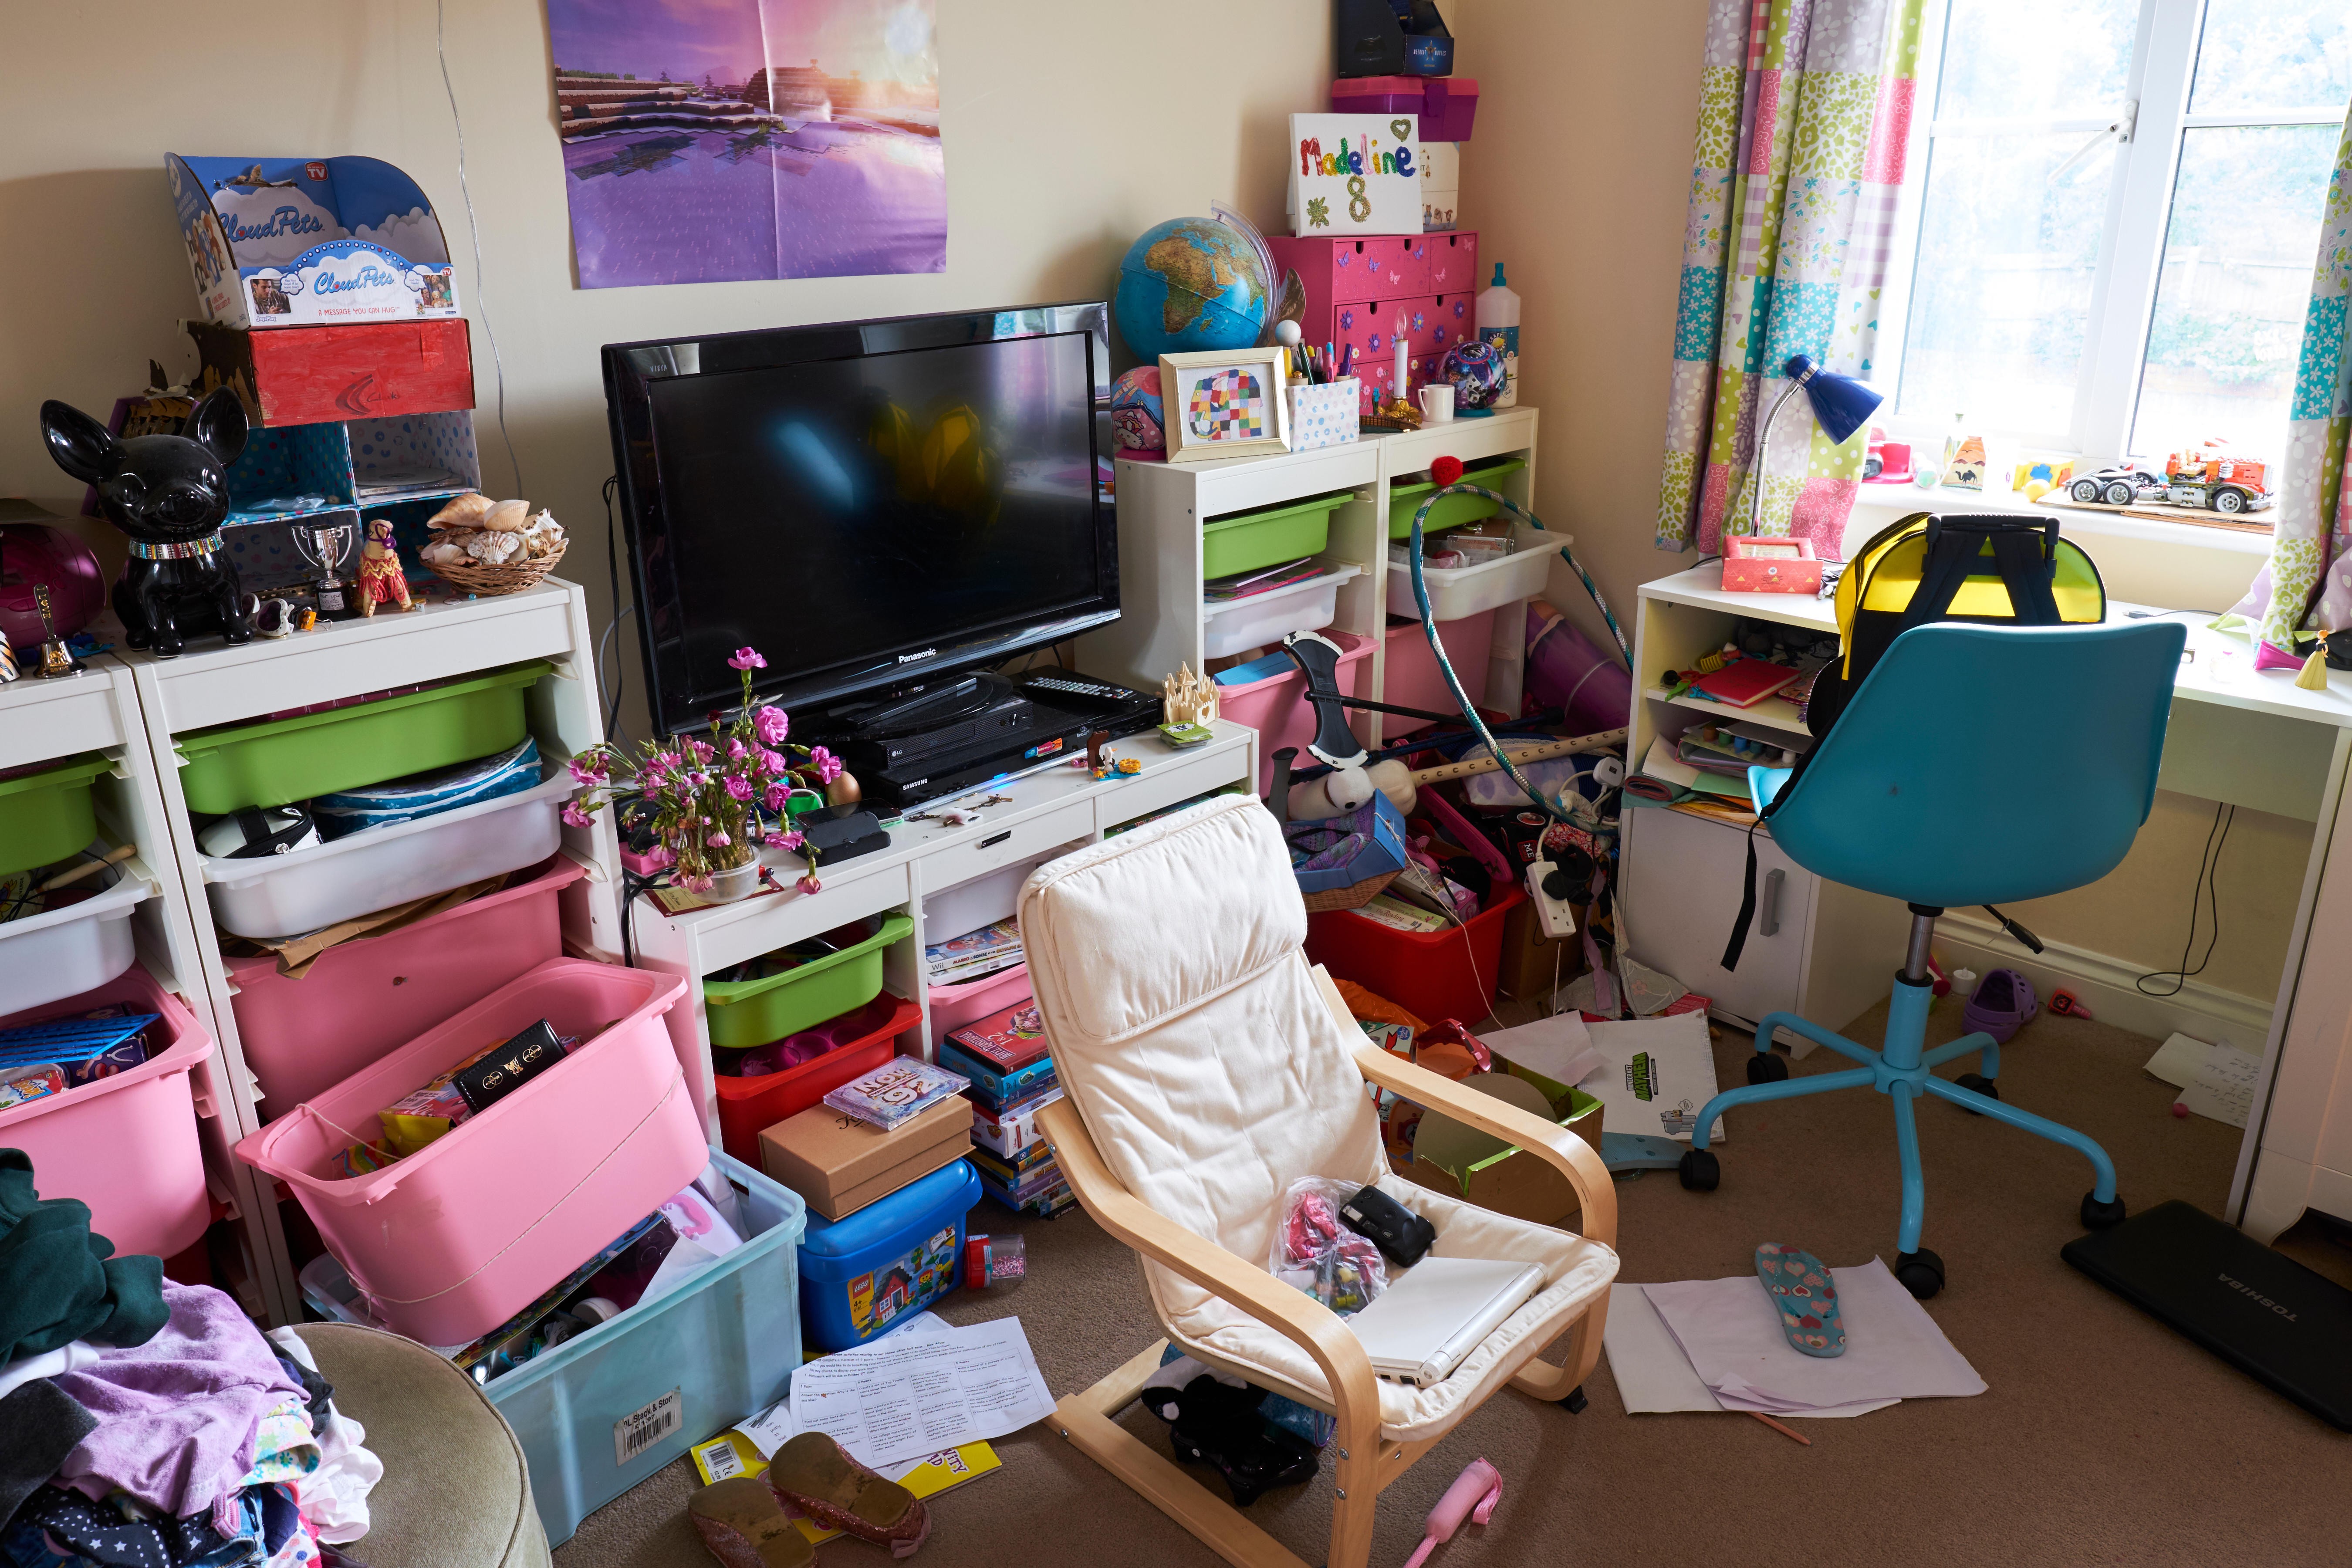 The Dangers of a Cluttered Home & Having Too Much Stuff